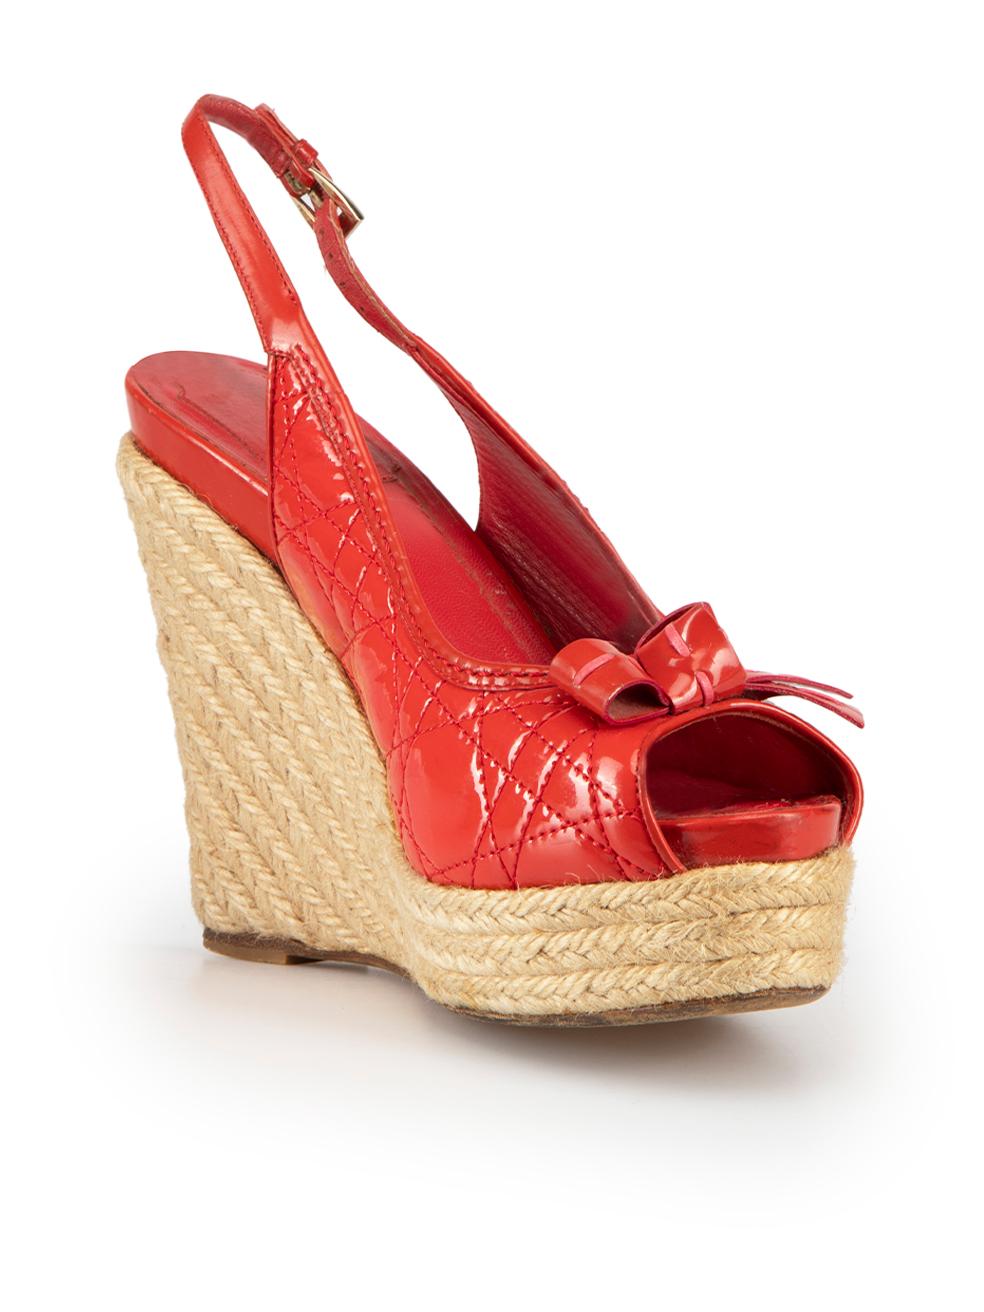 CONDITION is Good. Minor wear to espadrilles is evident. Light wear to patent leather with minor discoloured marks, minor glue residue to espadrille wedge and light wear to outer soles on this used Dior designer resale item.

Details
Red
Patent